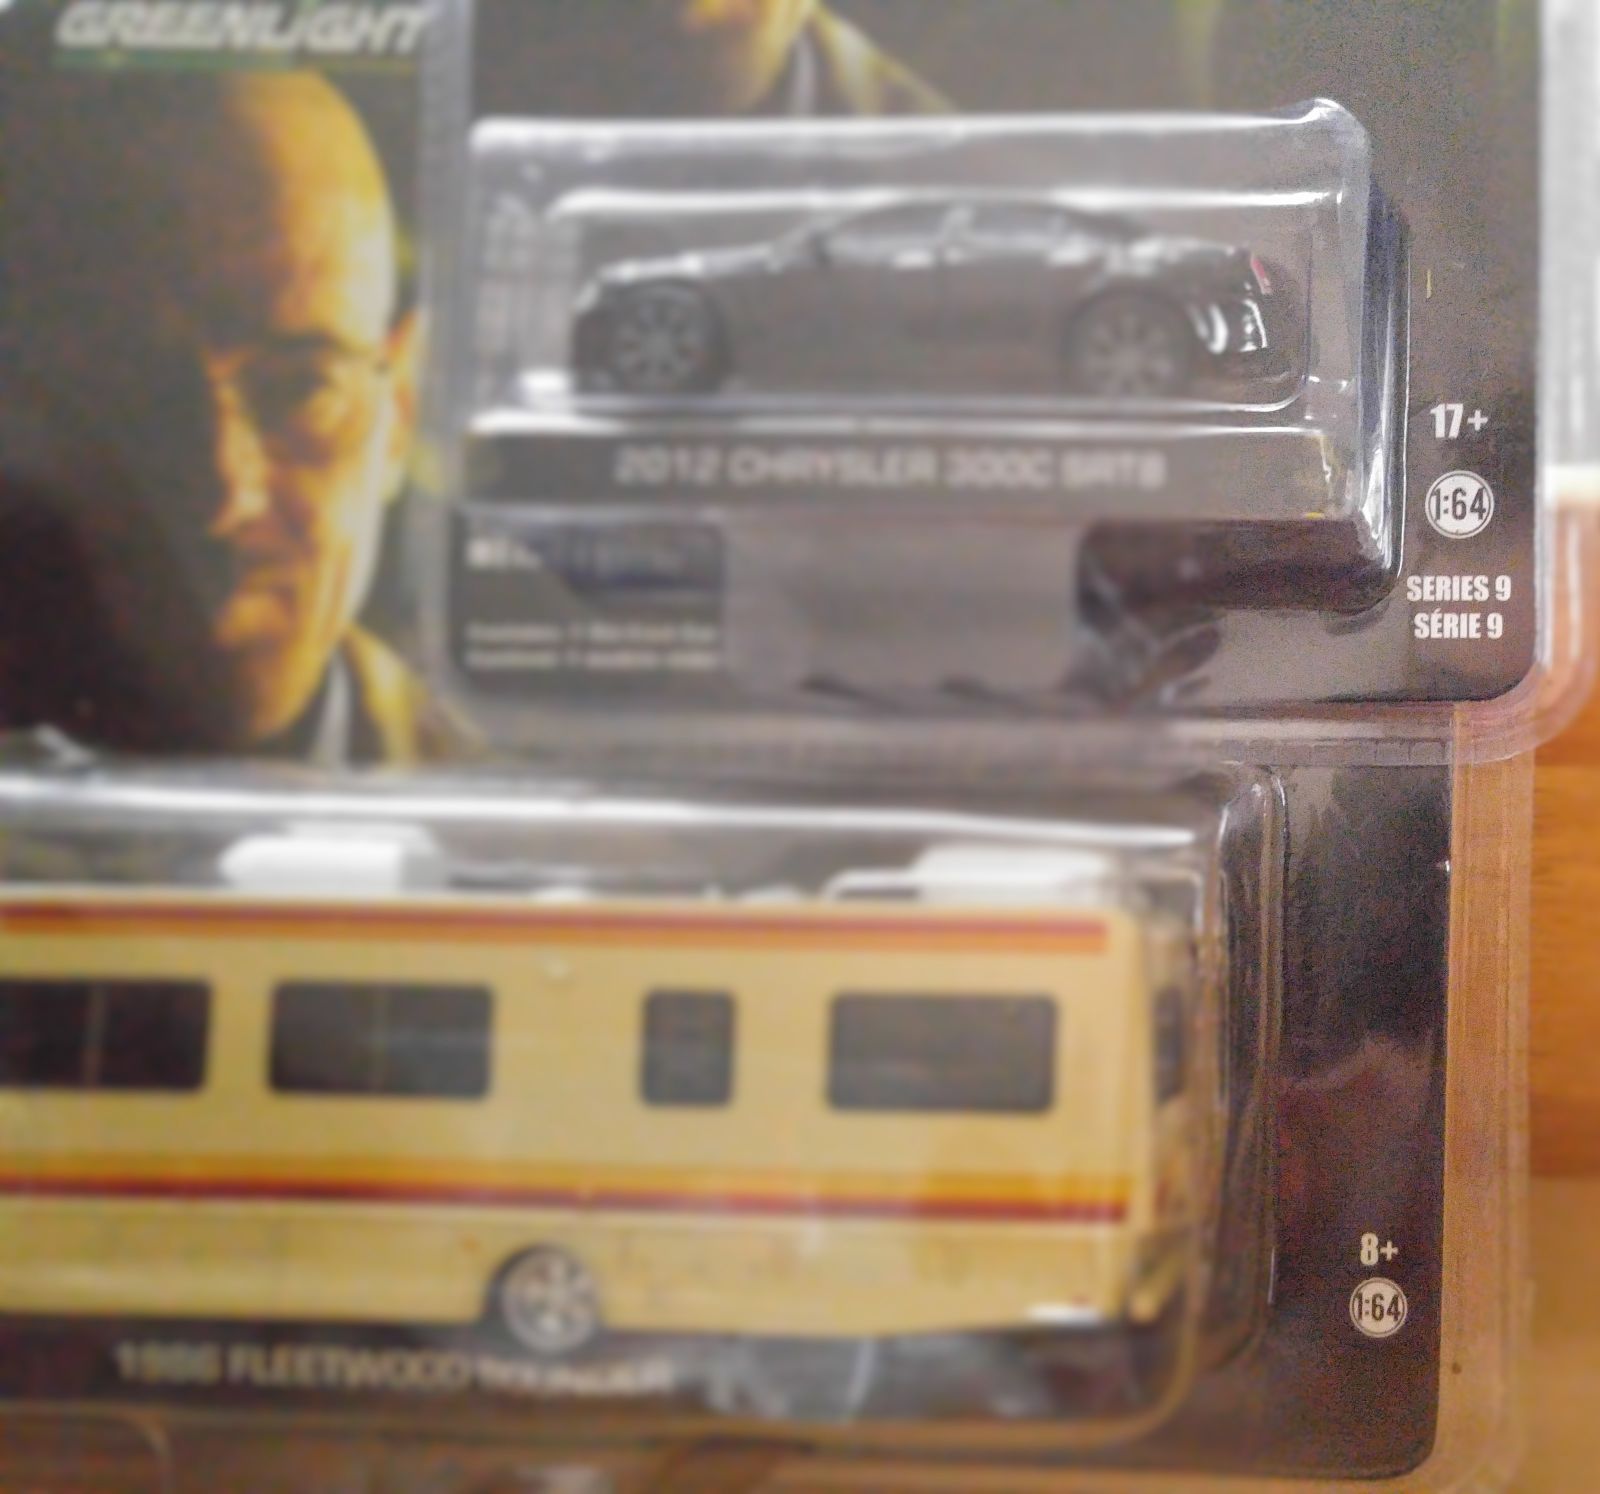 Illustration for article titled Recommended Age For Breaking Bad diecasts?